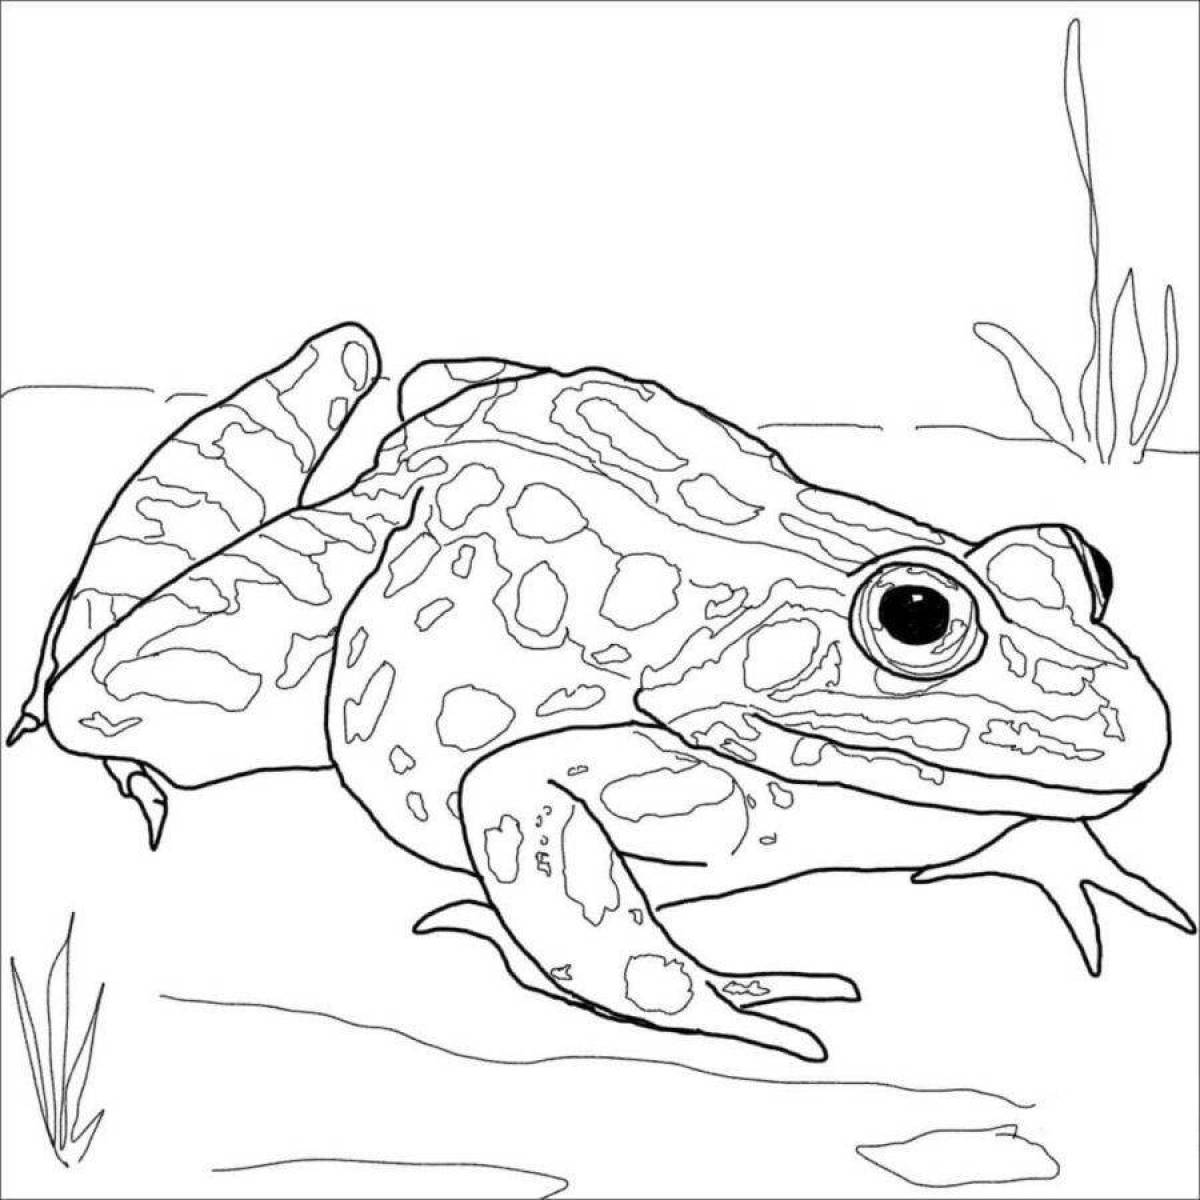 Intensive coloring of the dart frog